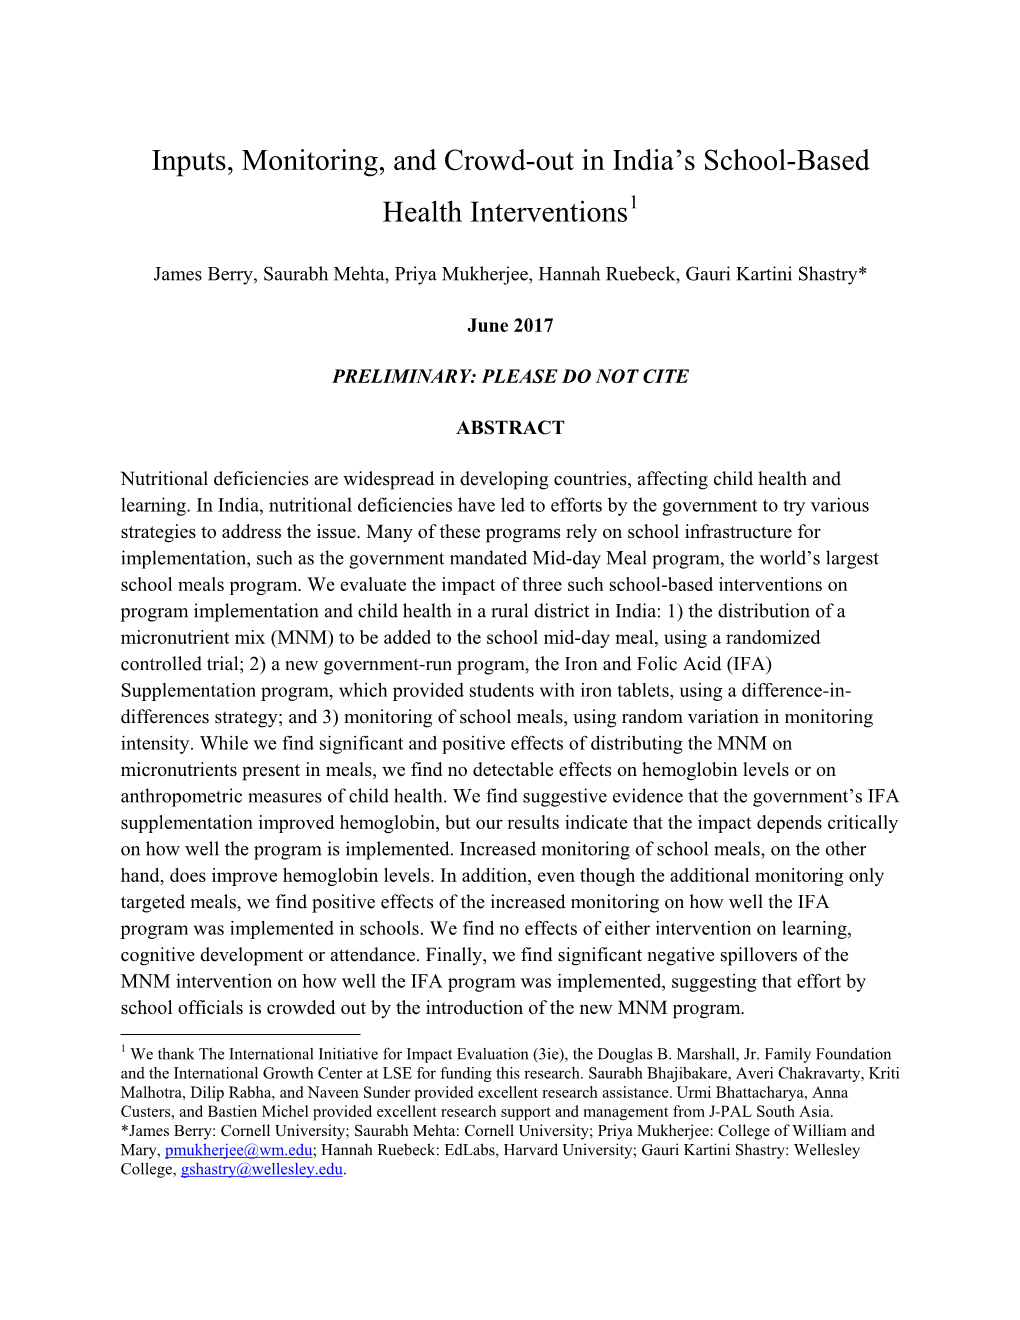 Inputs, Monitoring, and Crowd-Out in India's School-Based Health